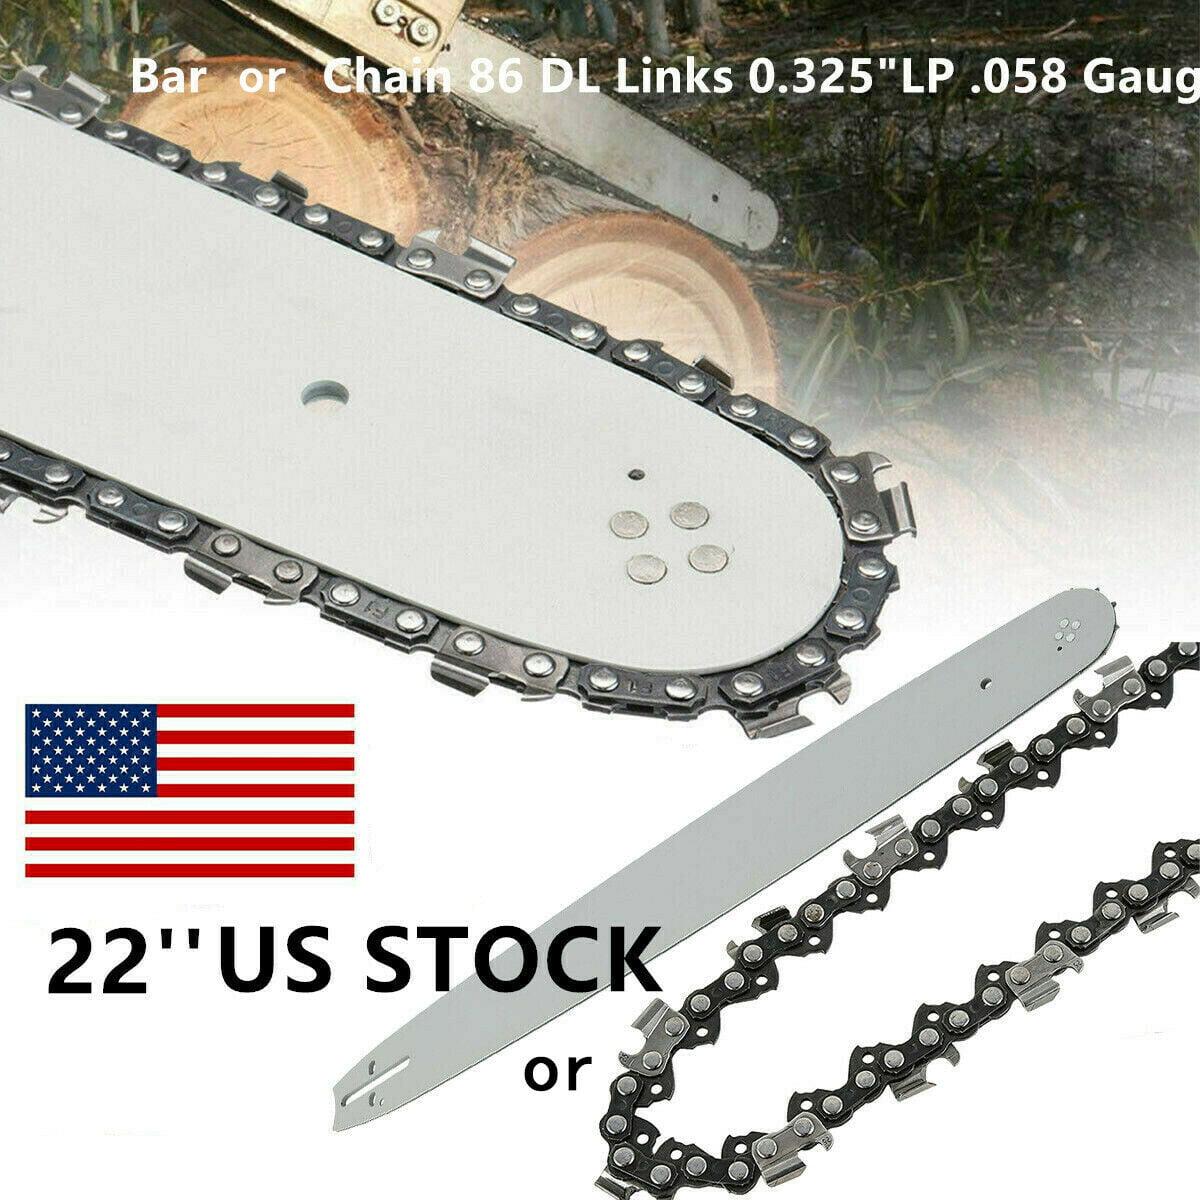 No Guide Bar 5Pcs 22" Chainsaw Saw Chain Blade 0.325" .058 Gauge 86DL Links 